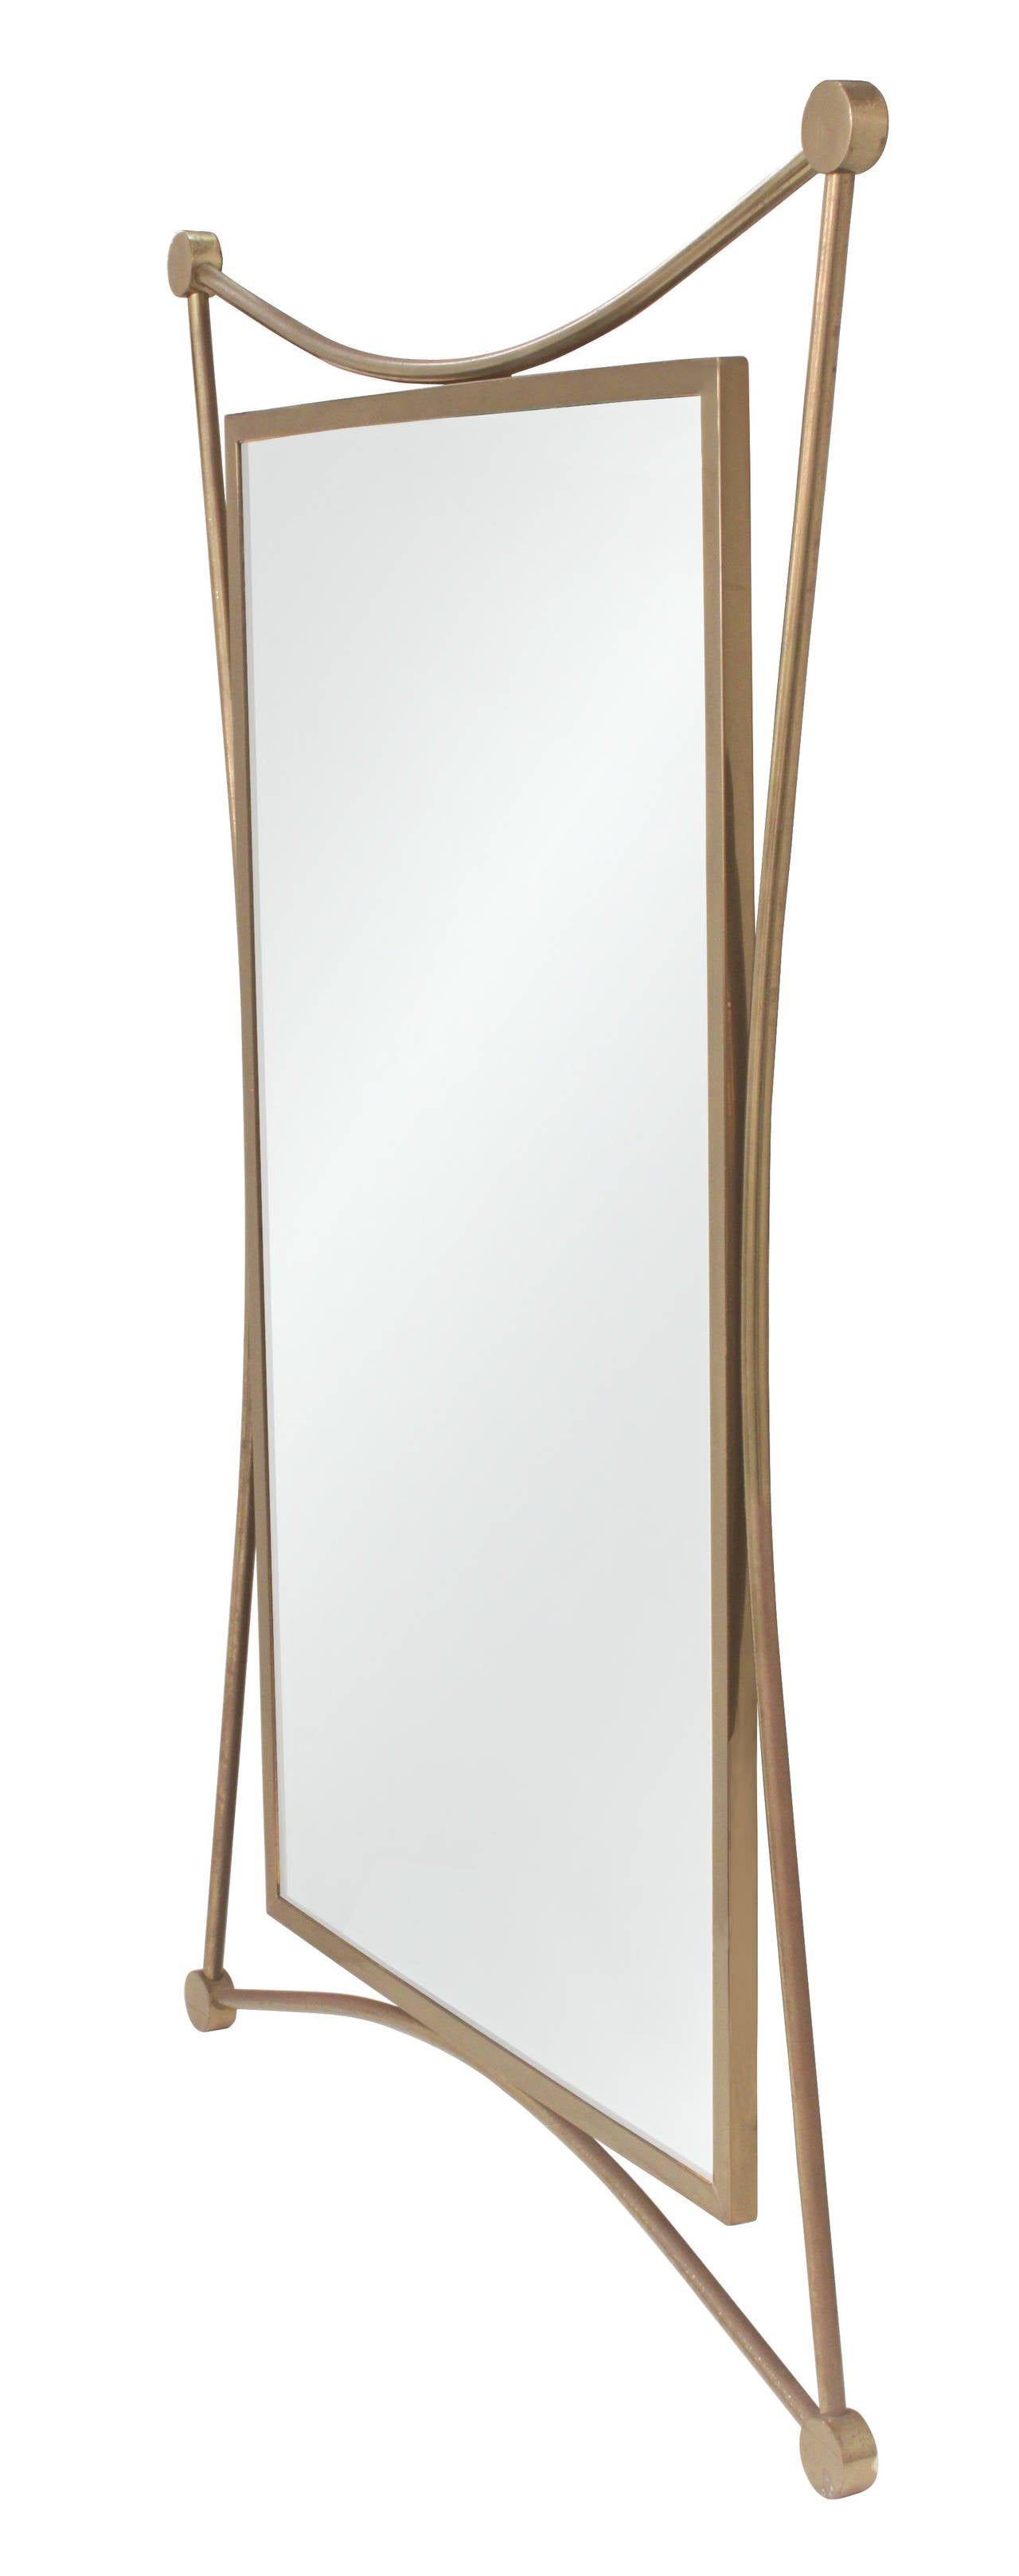 American Atomic Style Rectangular Mirror with Frame in Brass